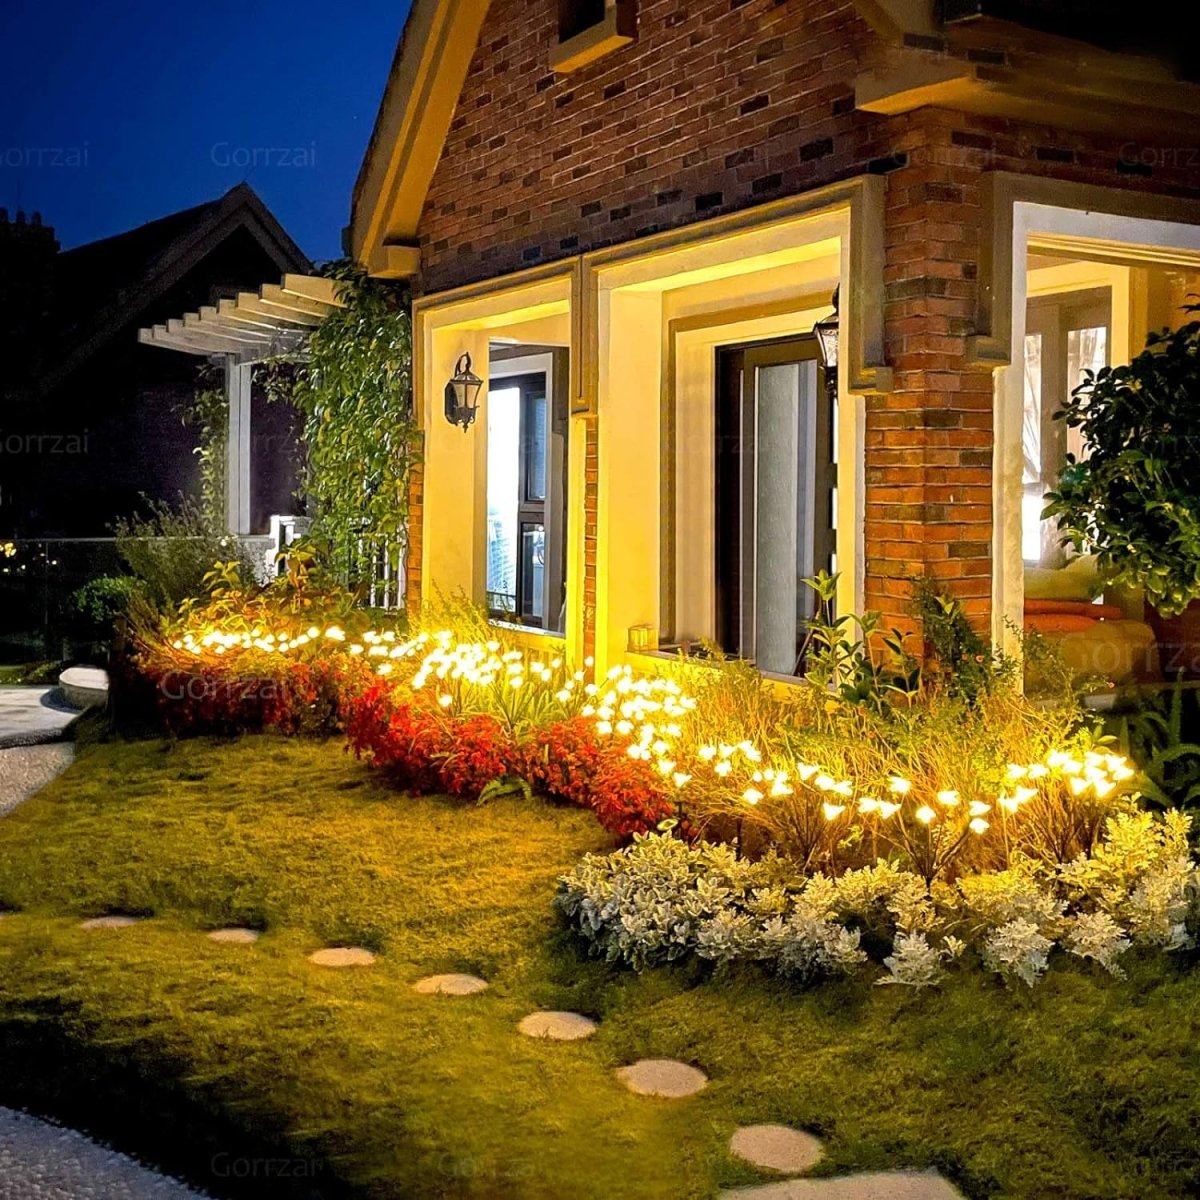 Brighten Your Home with Solar Lights: From Garden to Street - Hardoll